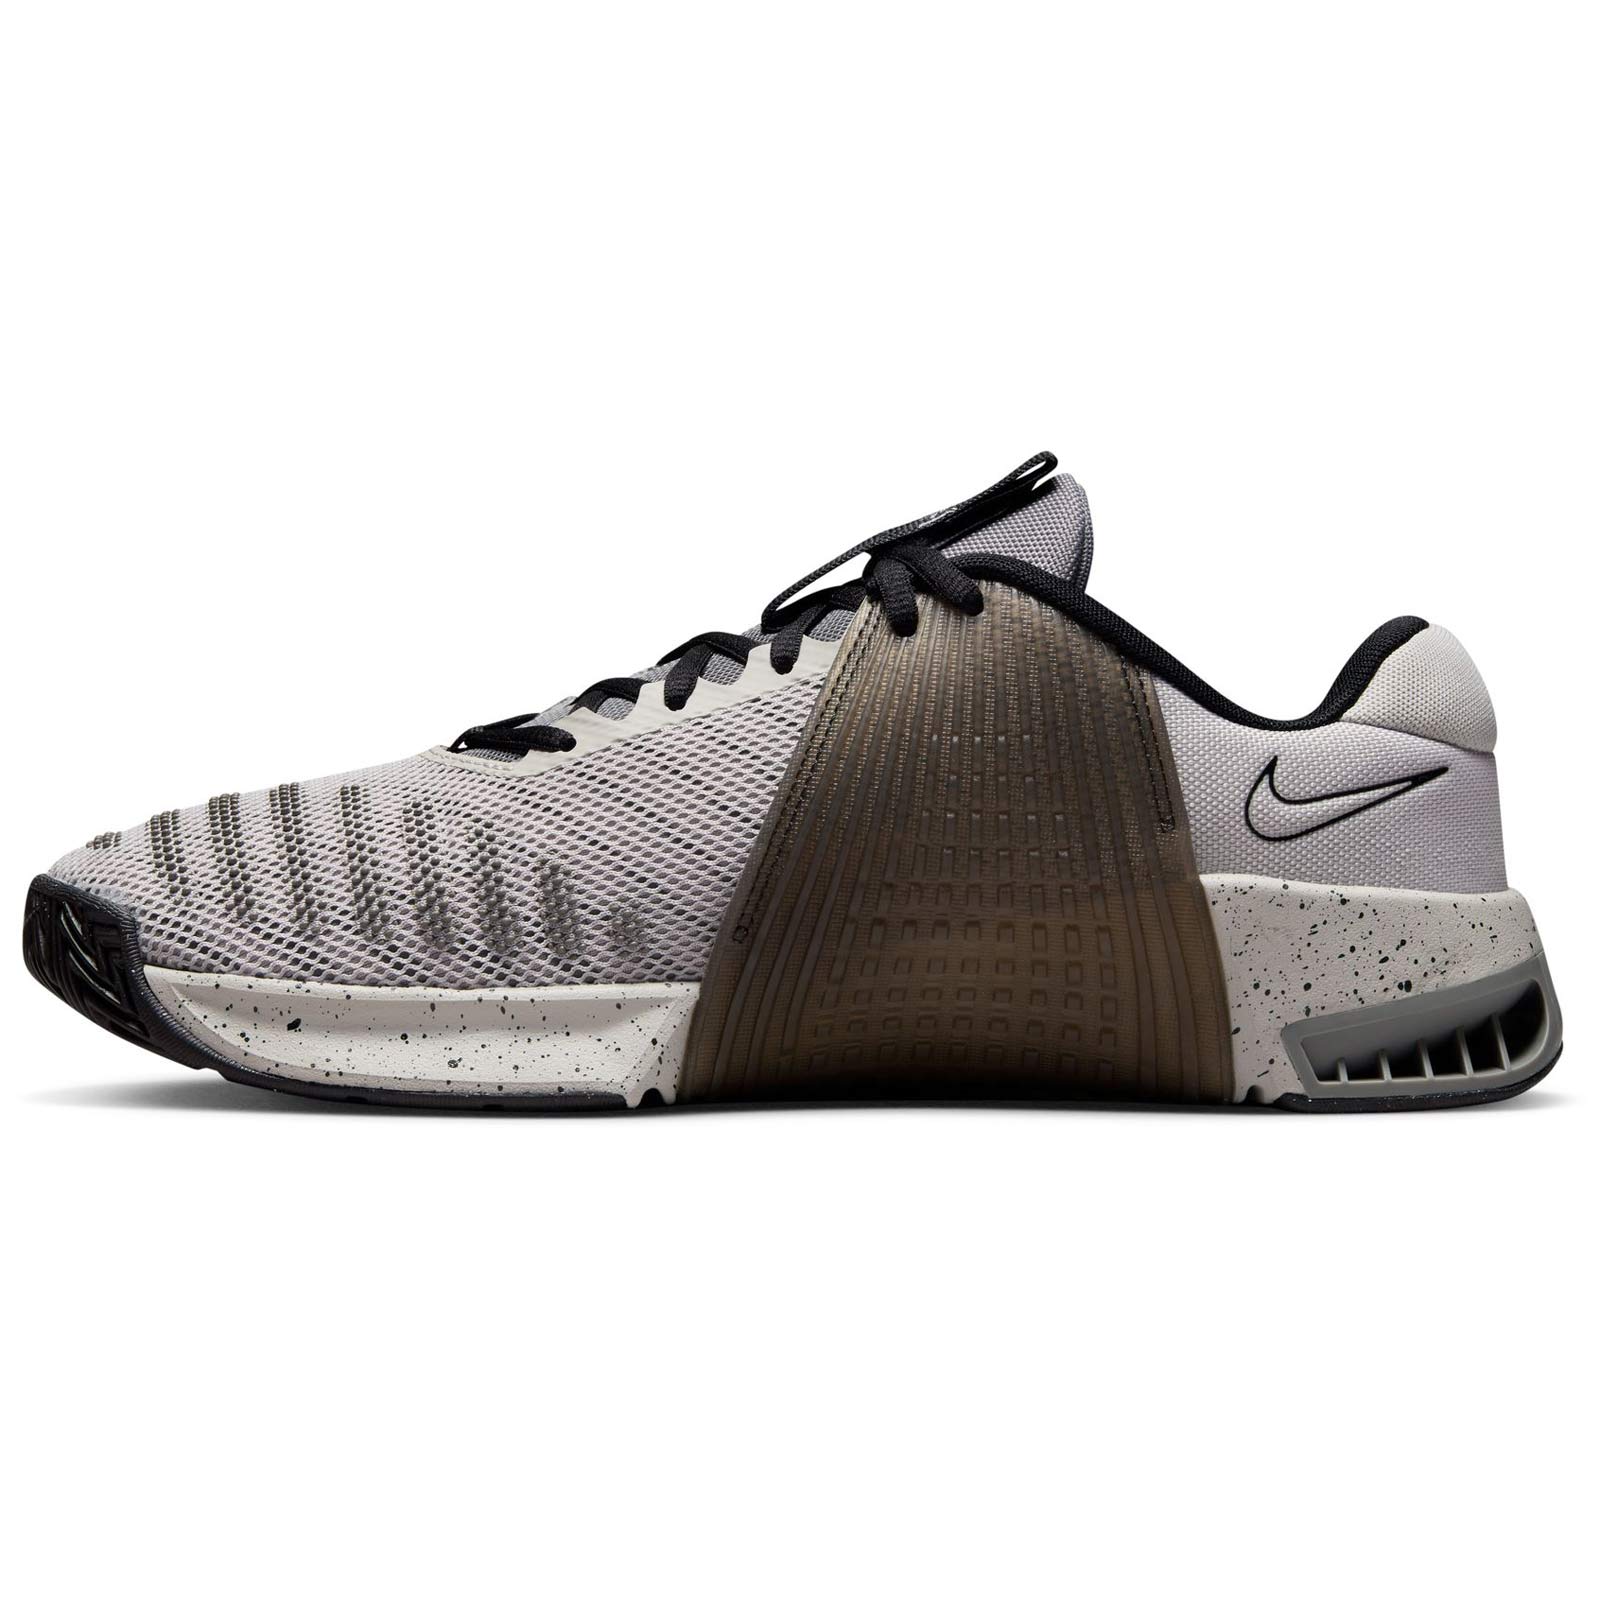 NIKE METCON 9 MENS WORKOUT SHOES